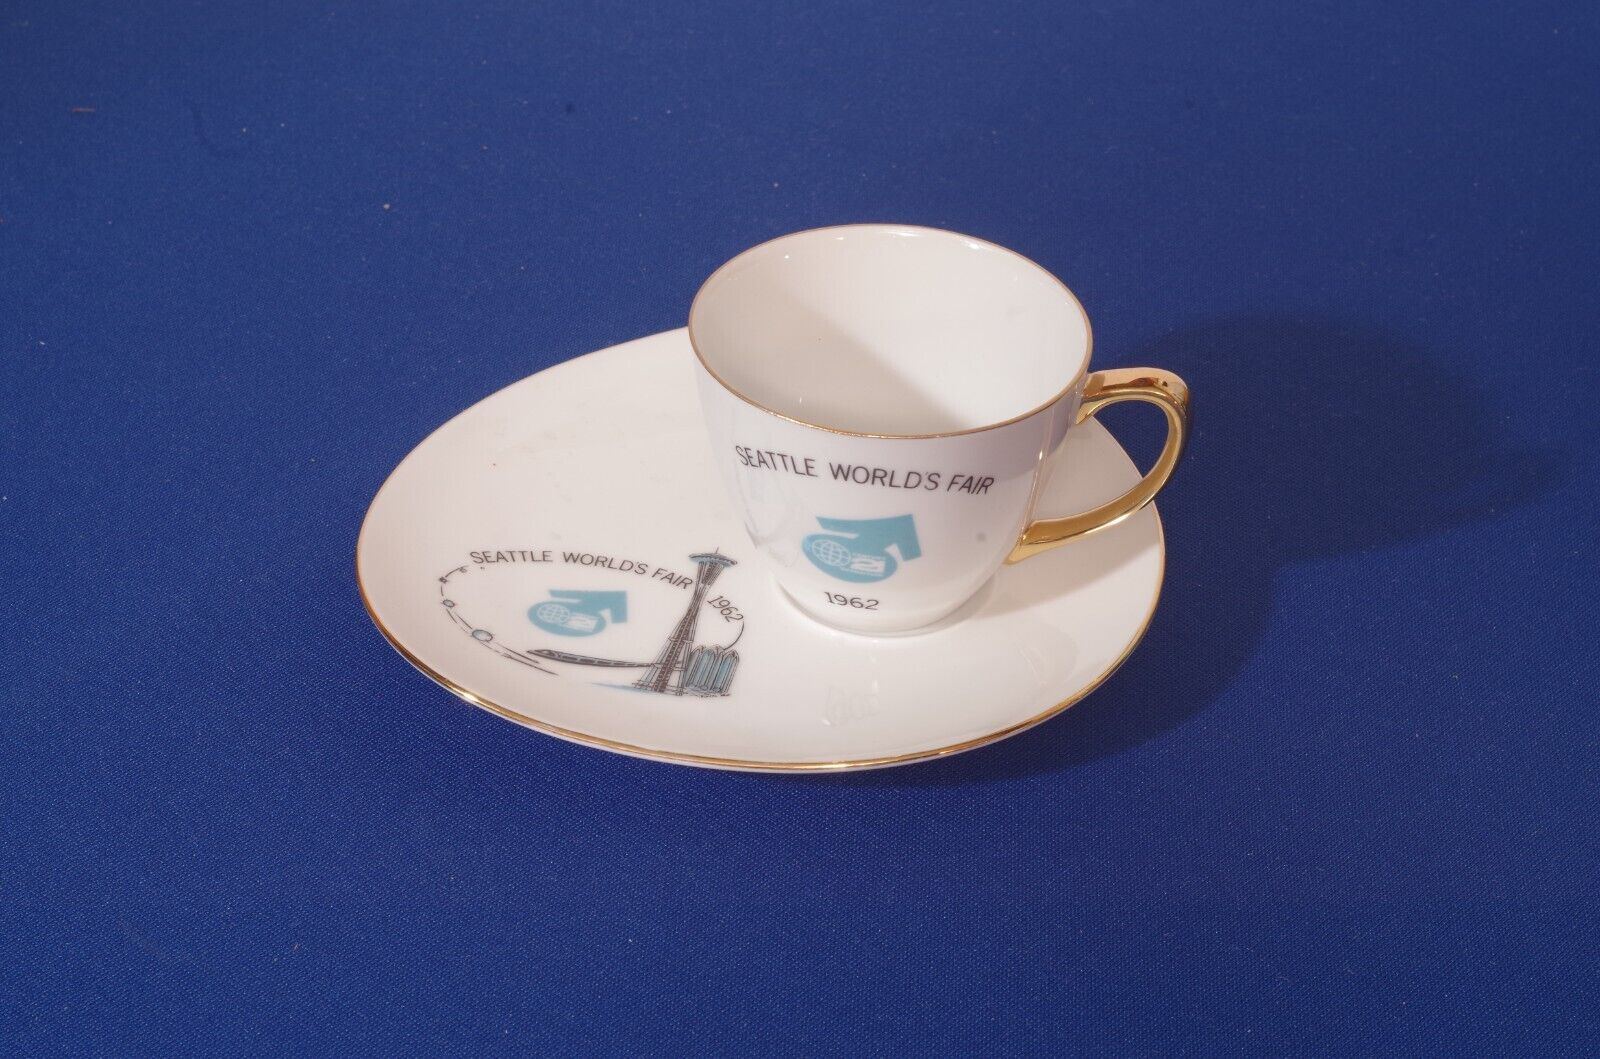 Seattle World's Fair 1962 Snack Set Cup And Saucer